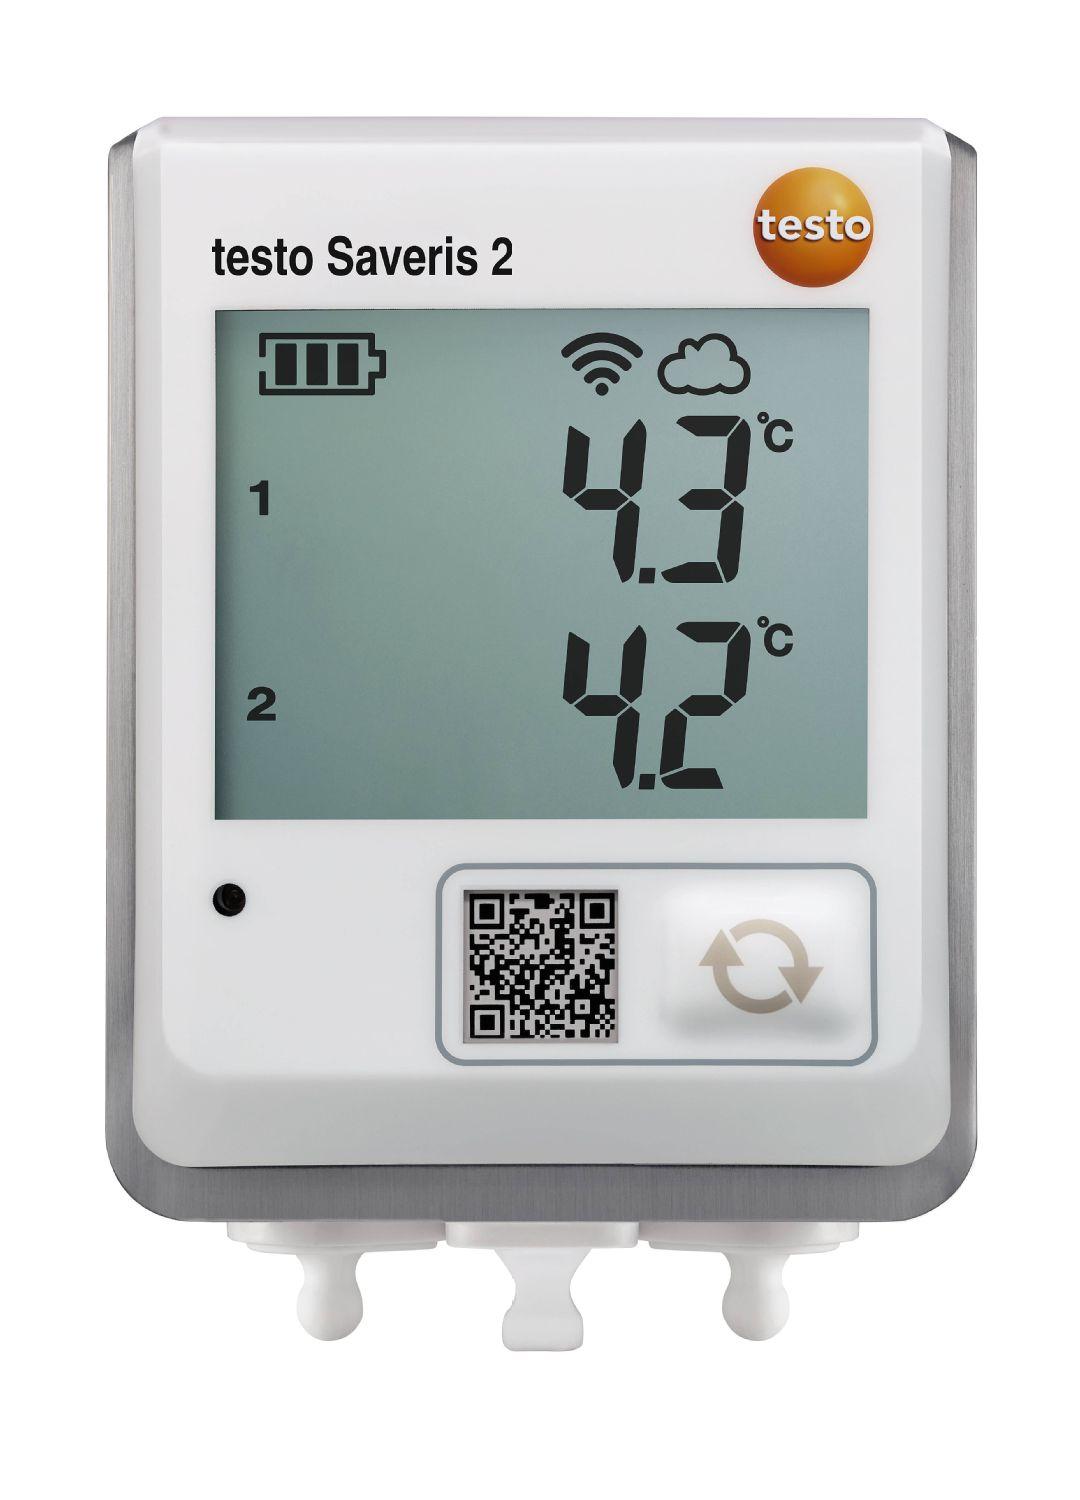 testo Saveris 2-T2 –  WiFi data logger with display and 2 connections for NTC temperature probes (testo Saveris 2-T2)